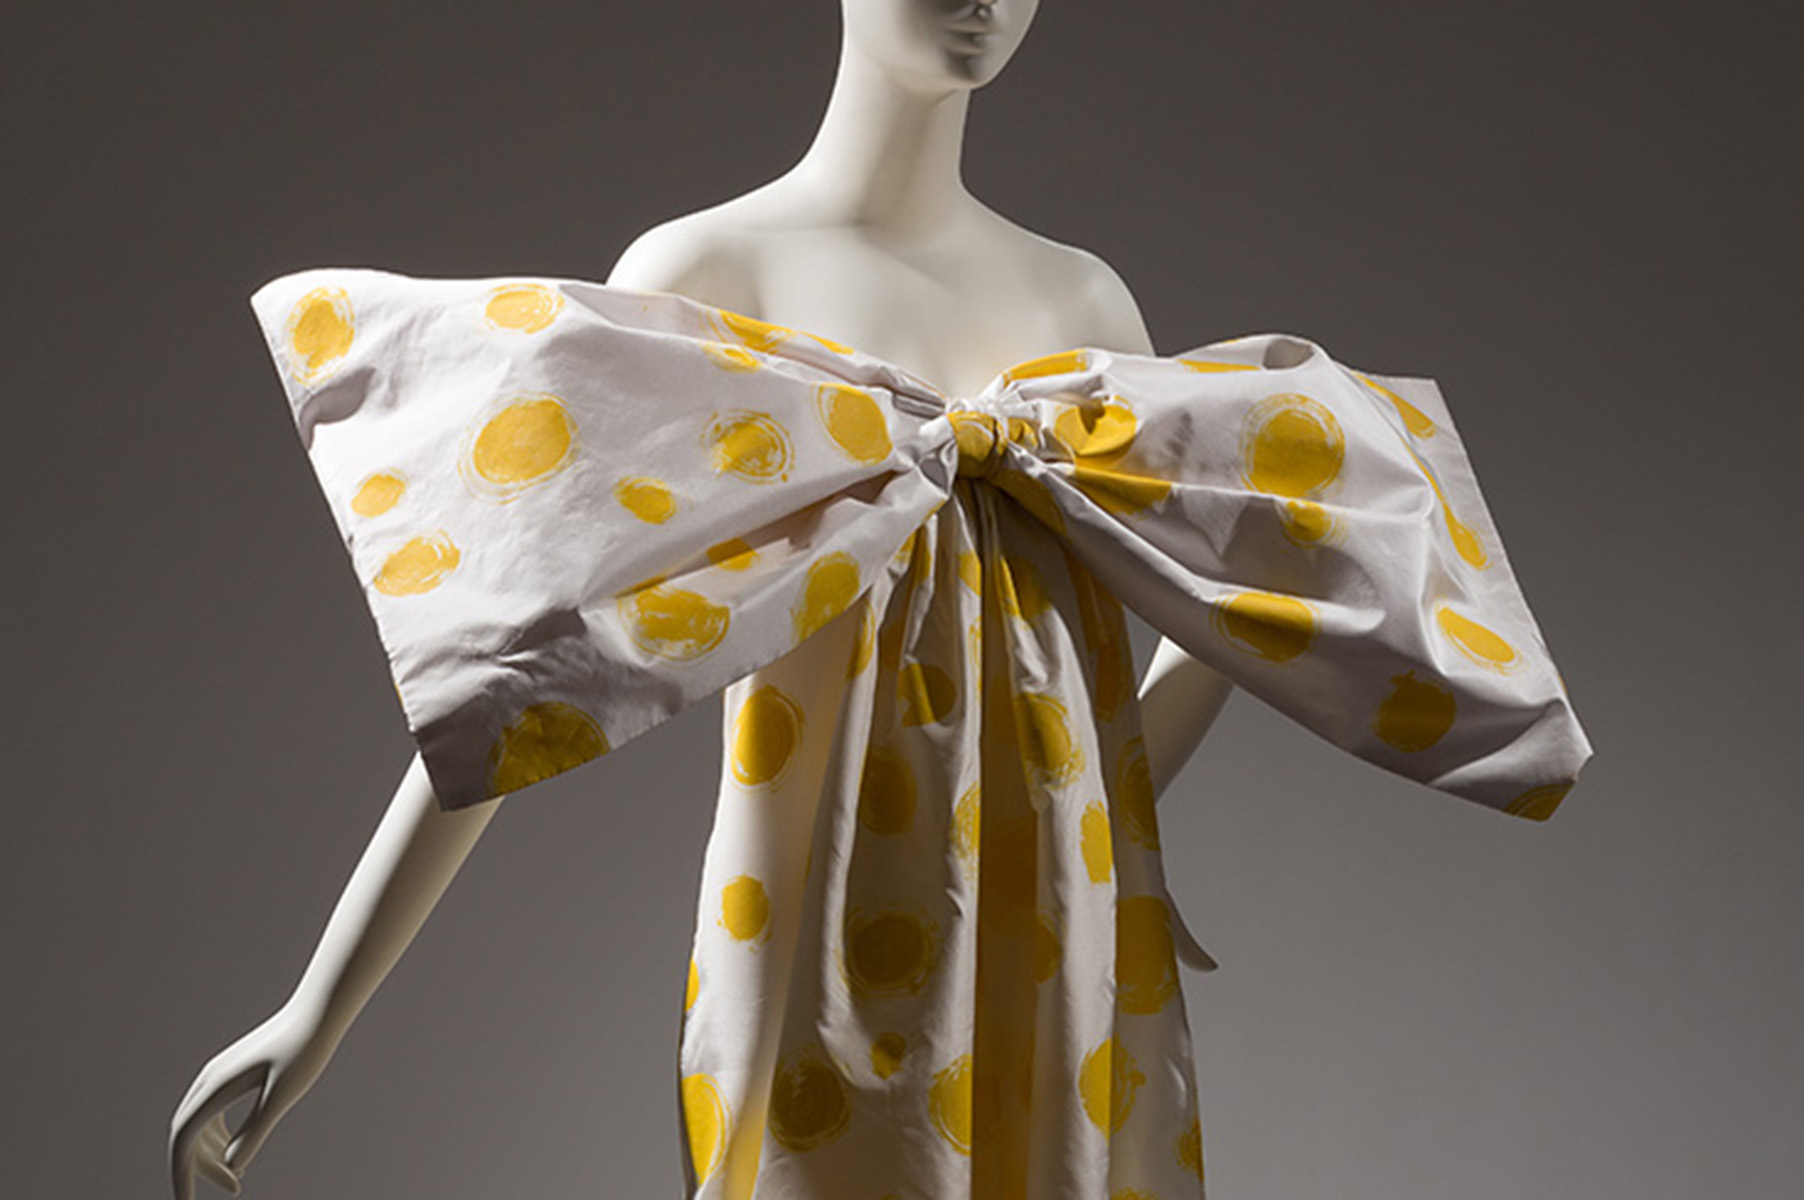 white silk dress with yellow painted polka dots and an oversized bow covering the bust